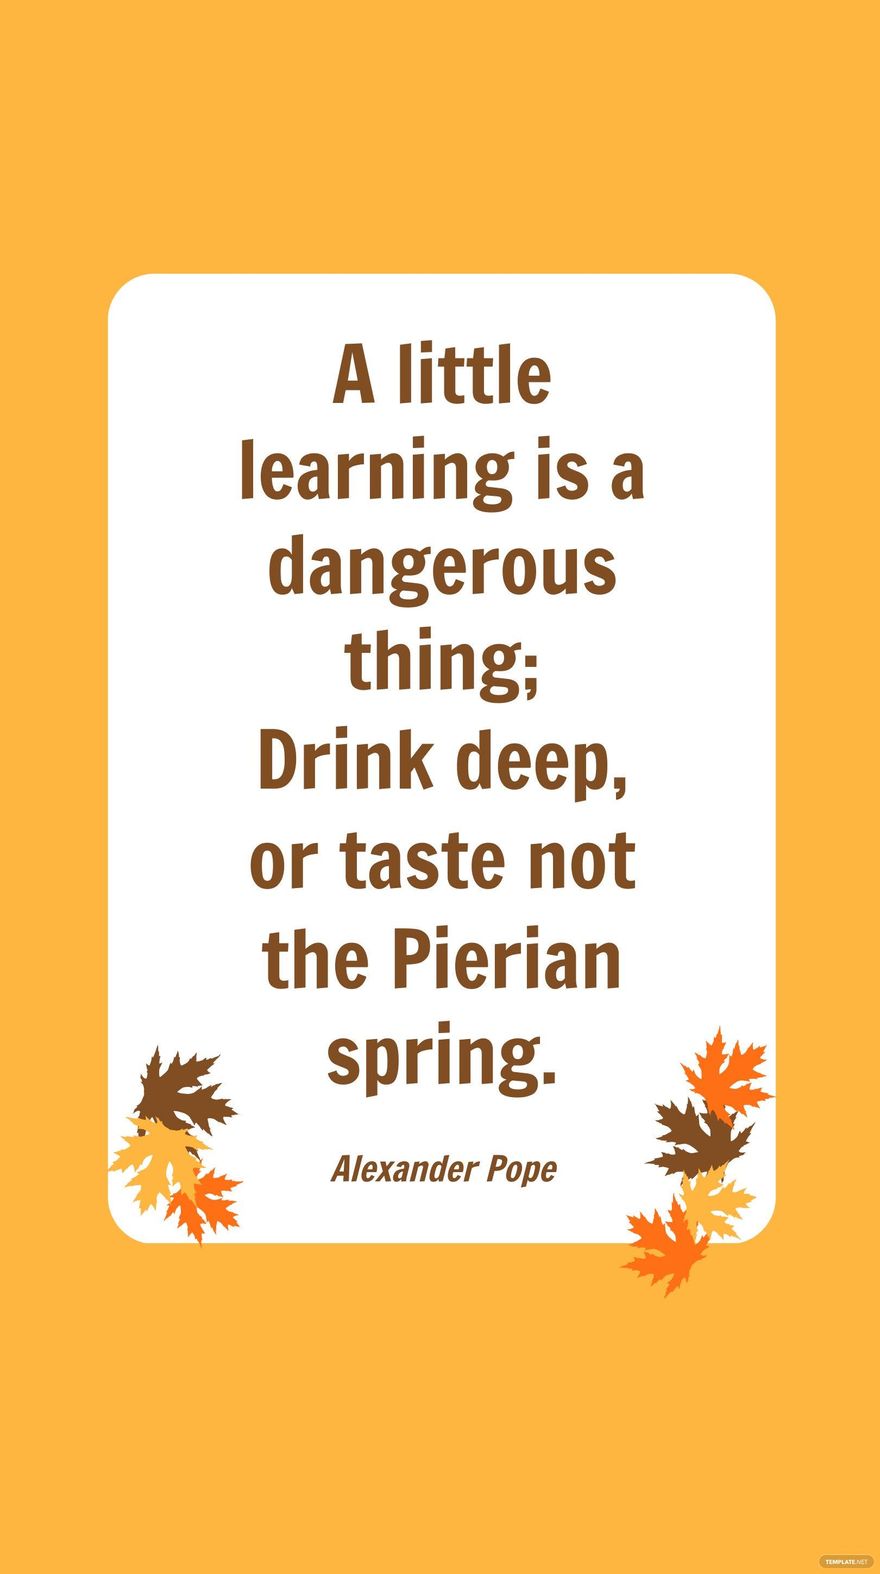 Alexander Pope - A little learning is a dangerous thing; Drink deep, or taste not the Pierian spring.